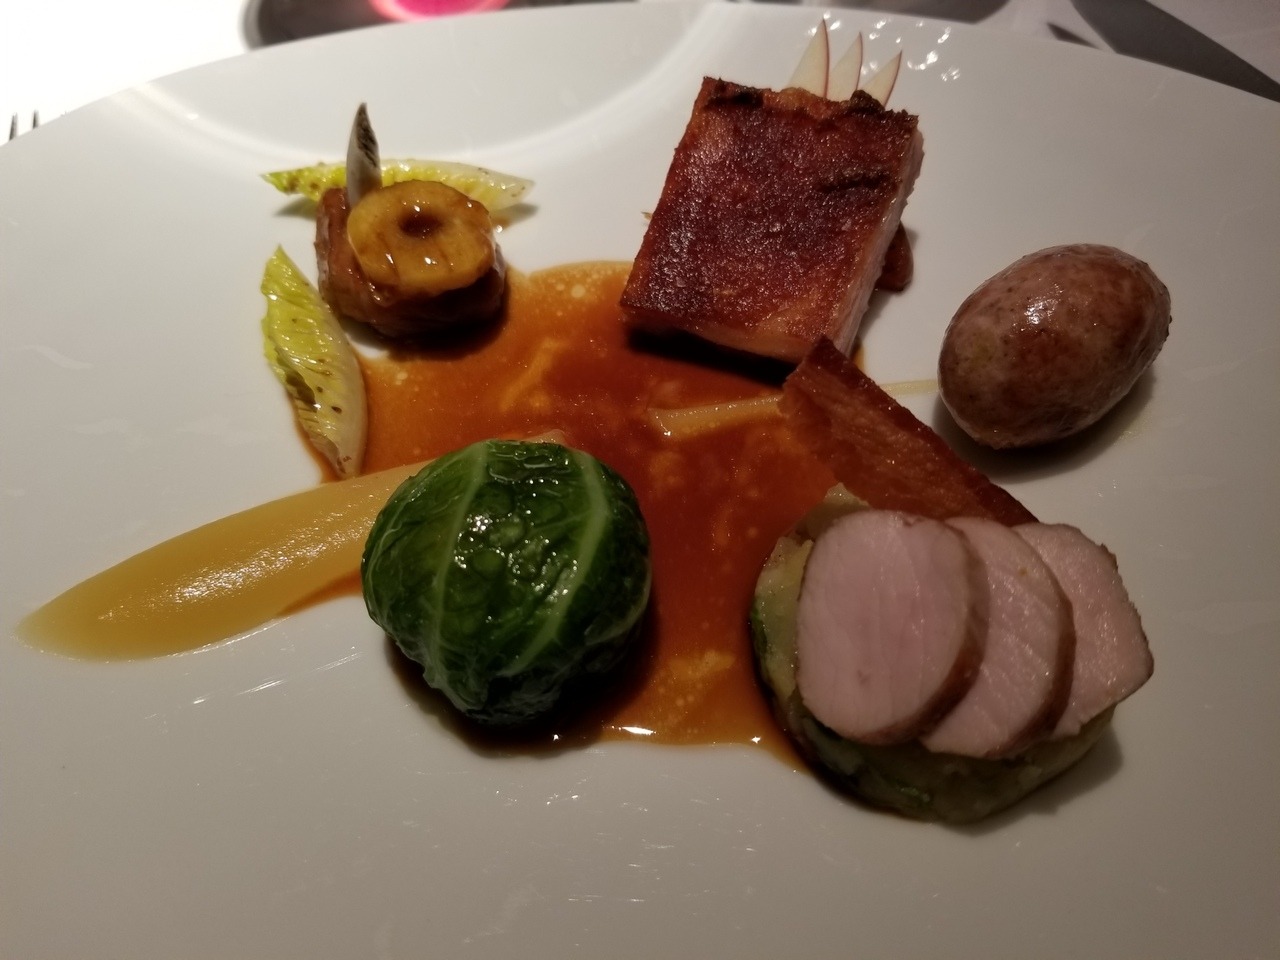 While in London, we had the privilege of having lunch at Restaurant Gordon Ramsay, in Chelsea. The most amazing food you will ever have in your life. I did not get pictures of everything, I was too busy being awed and savoring each delectable morsel.